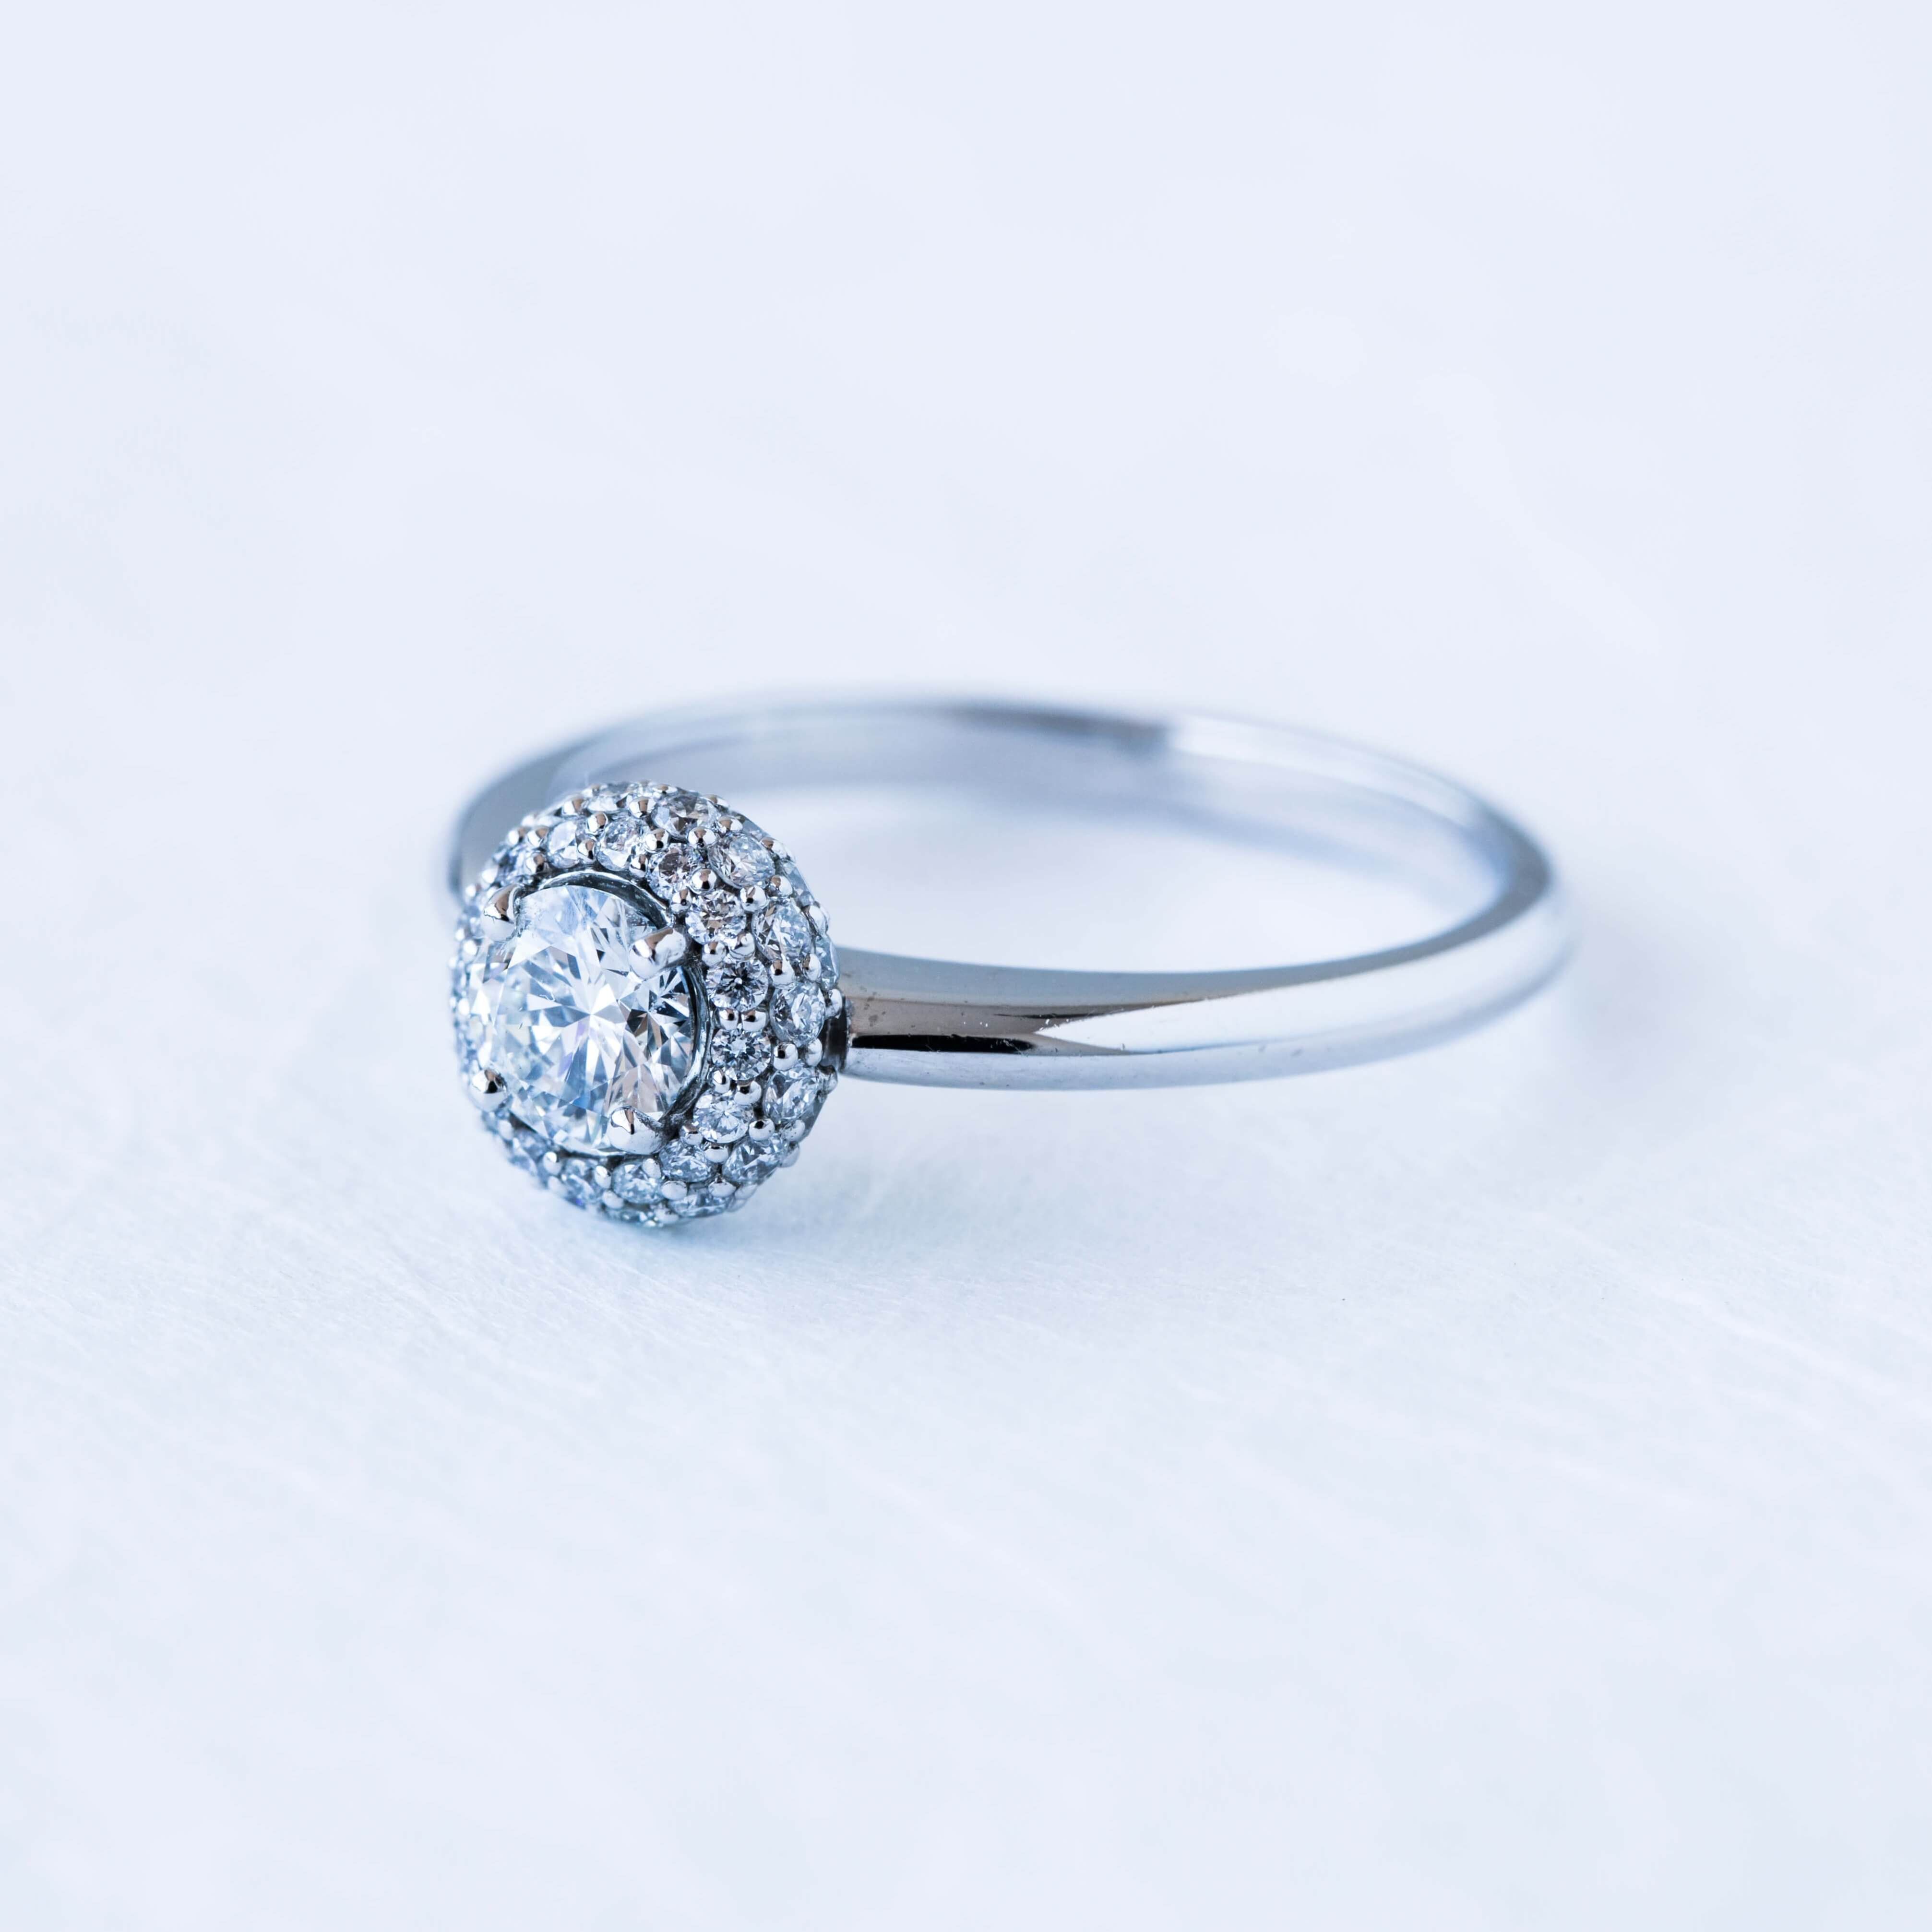 Double Micro Pavé Diamond Halo With Round Brilliant Cut With Regard To Round Brilliant Diamond Micropavé Engagement Rings (View 23 of 25)